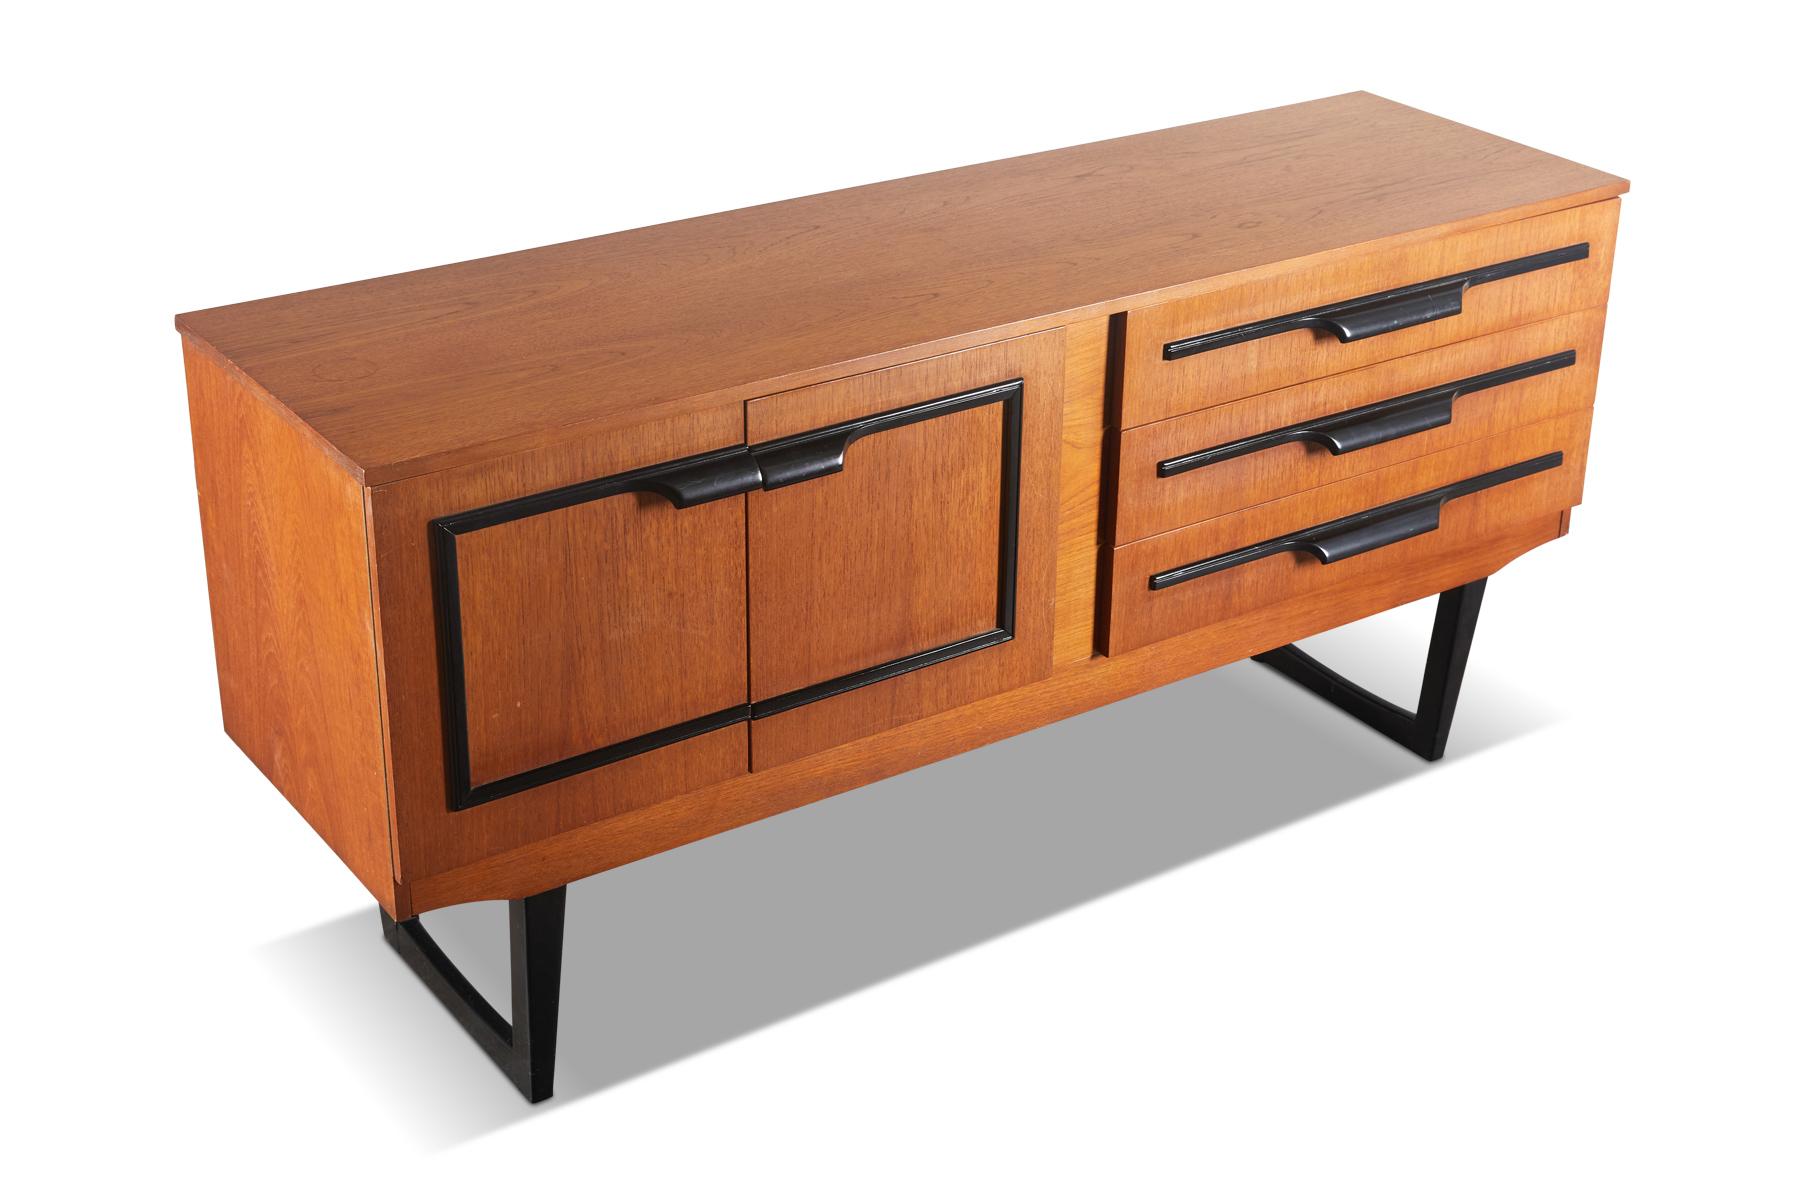 English Modern Midcentury Credenza in Teak with Black Lacquer Accents 5